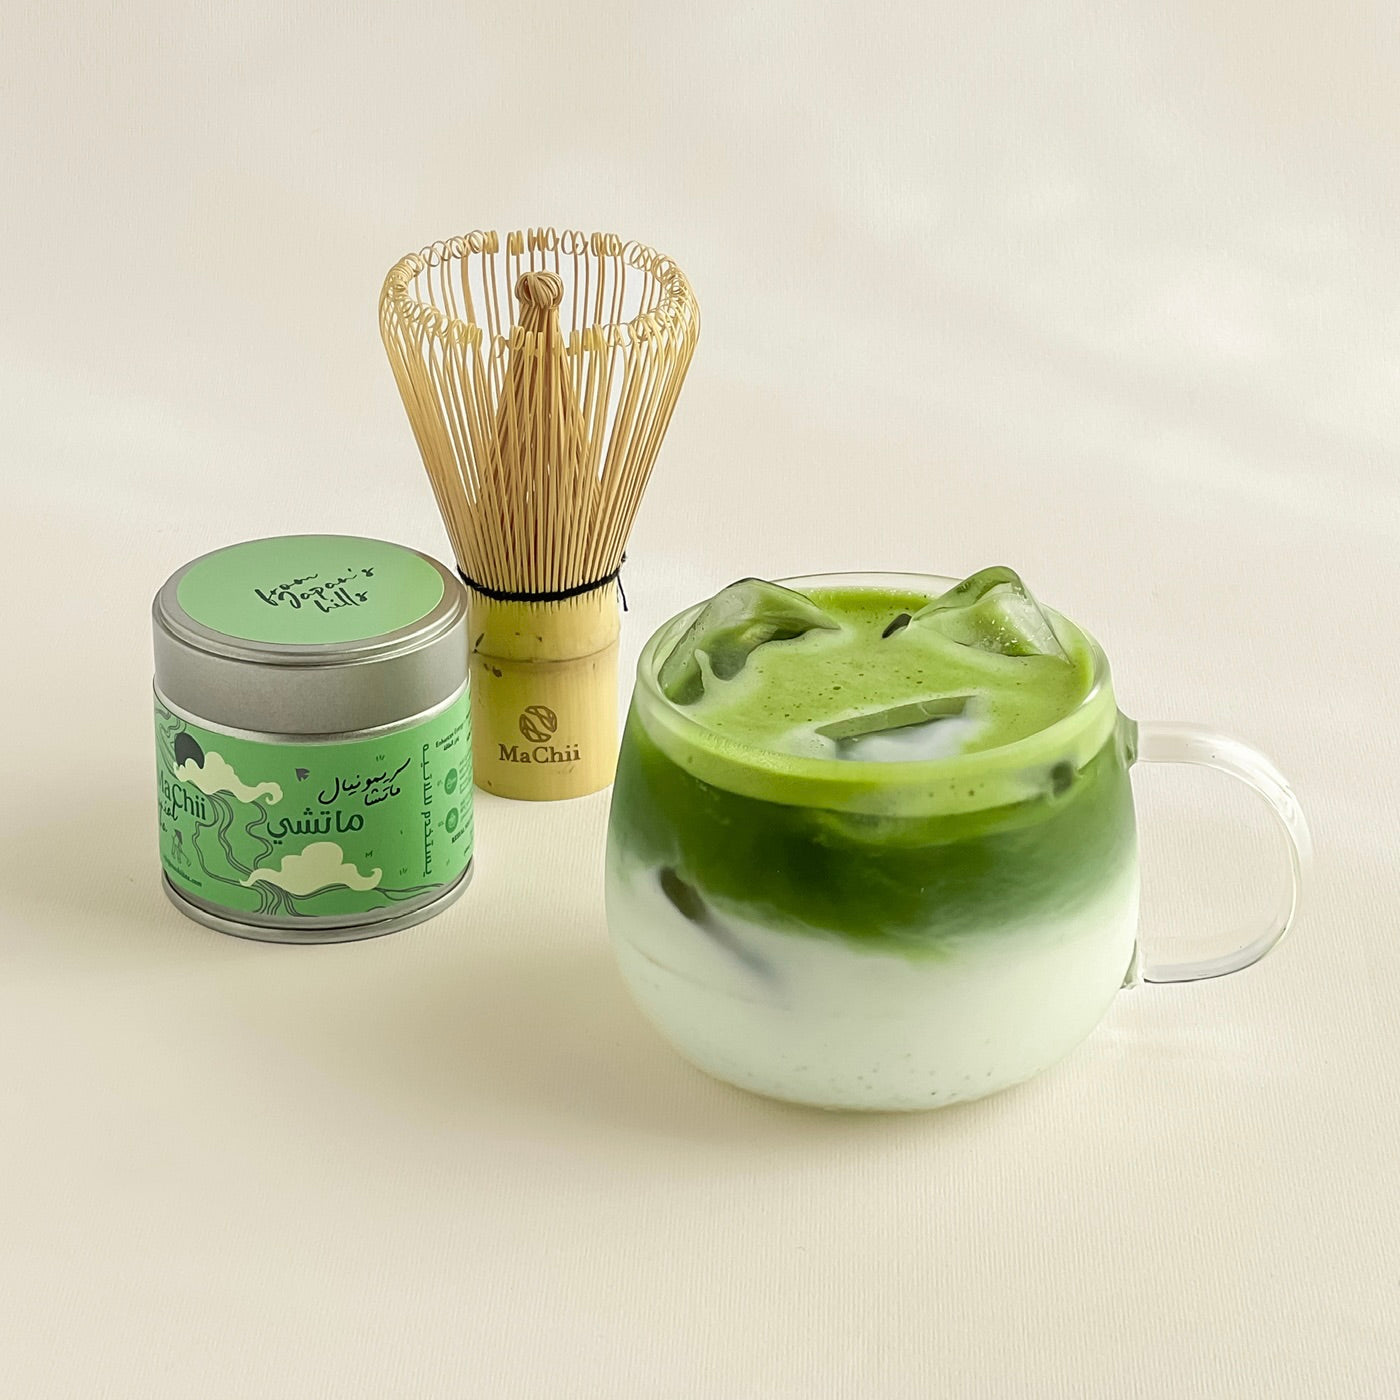 A cup of matcha green tea with a whisk next to it. A MaChii Tea tin on the side.